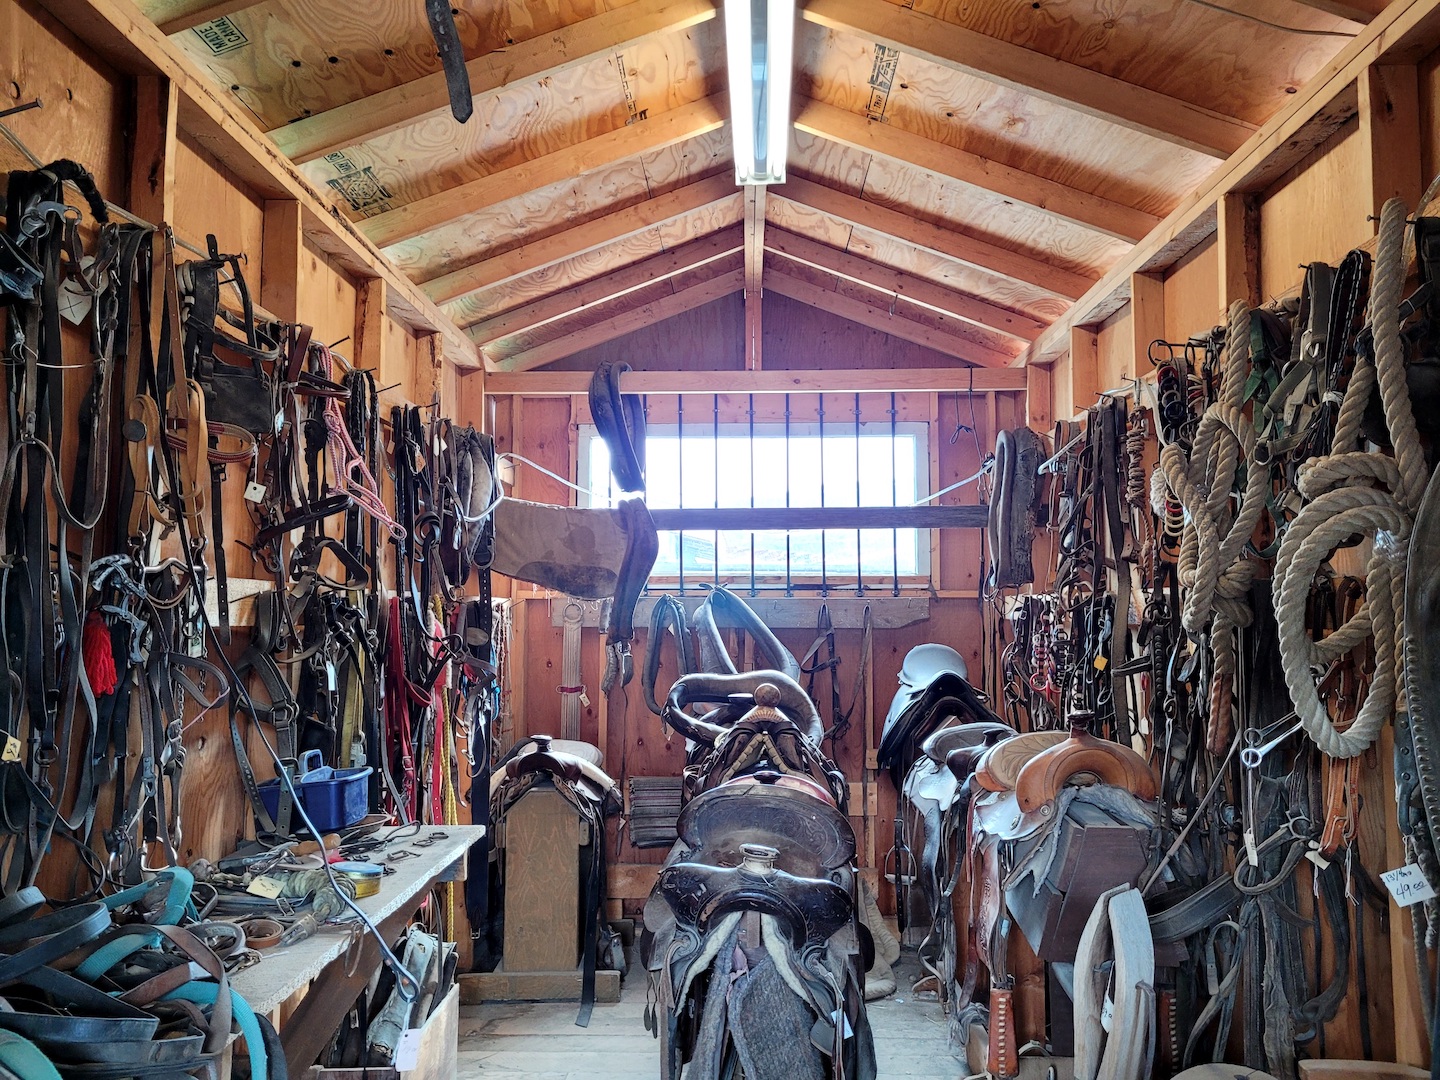 photo of a dusty old tack room full of dry, worn out used tack